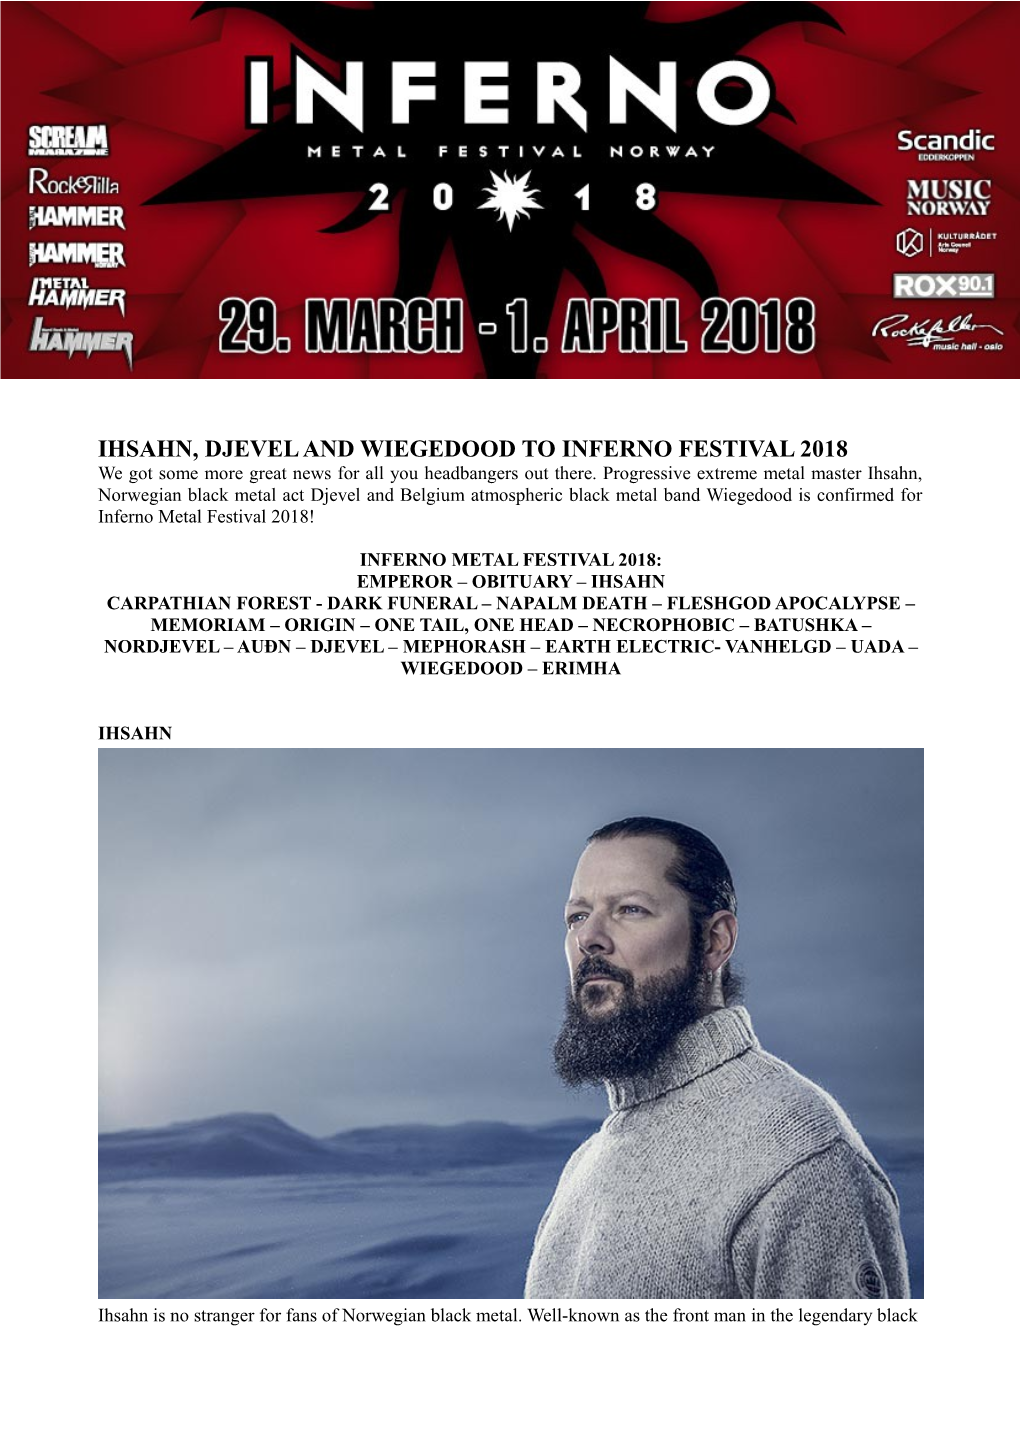 IHSAHN, DJEVEL and WIEGEDOOD to INFERNO FESTIVAL 2018 We Got Some More Great News for All You Headbangers out There